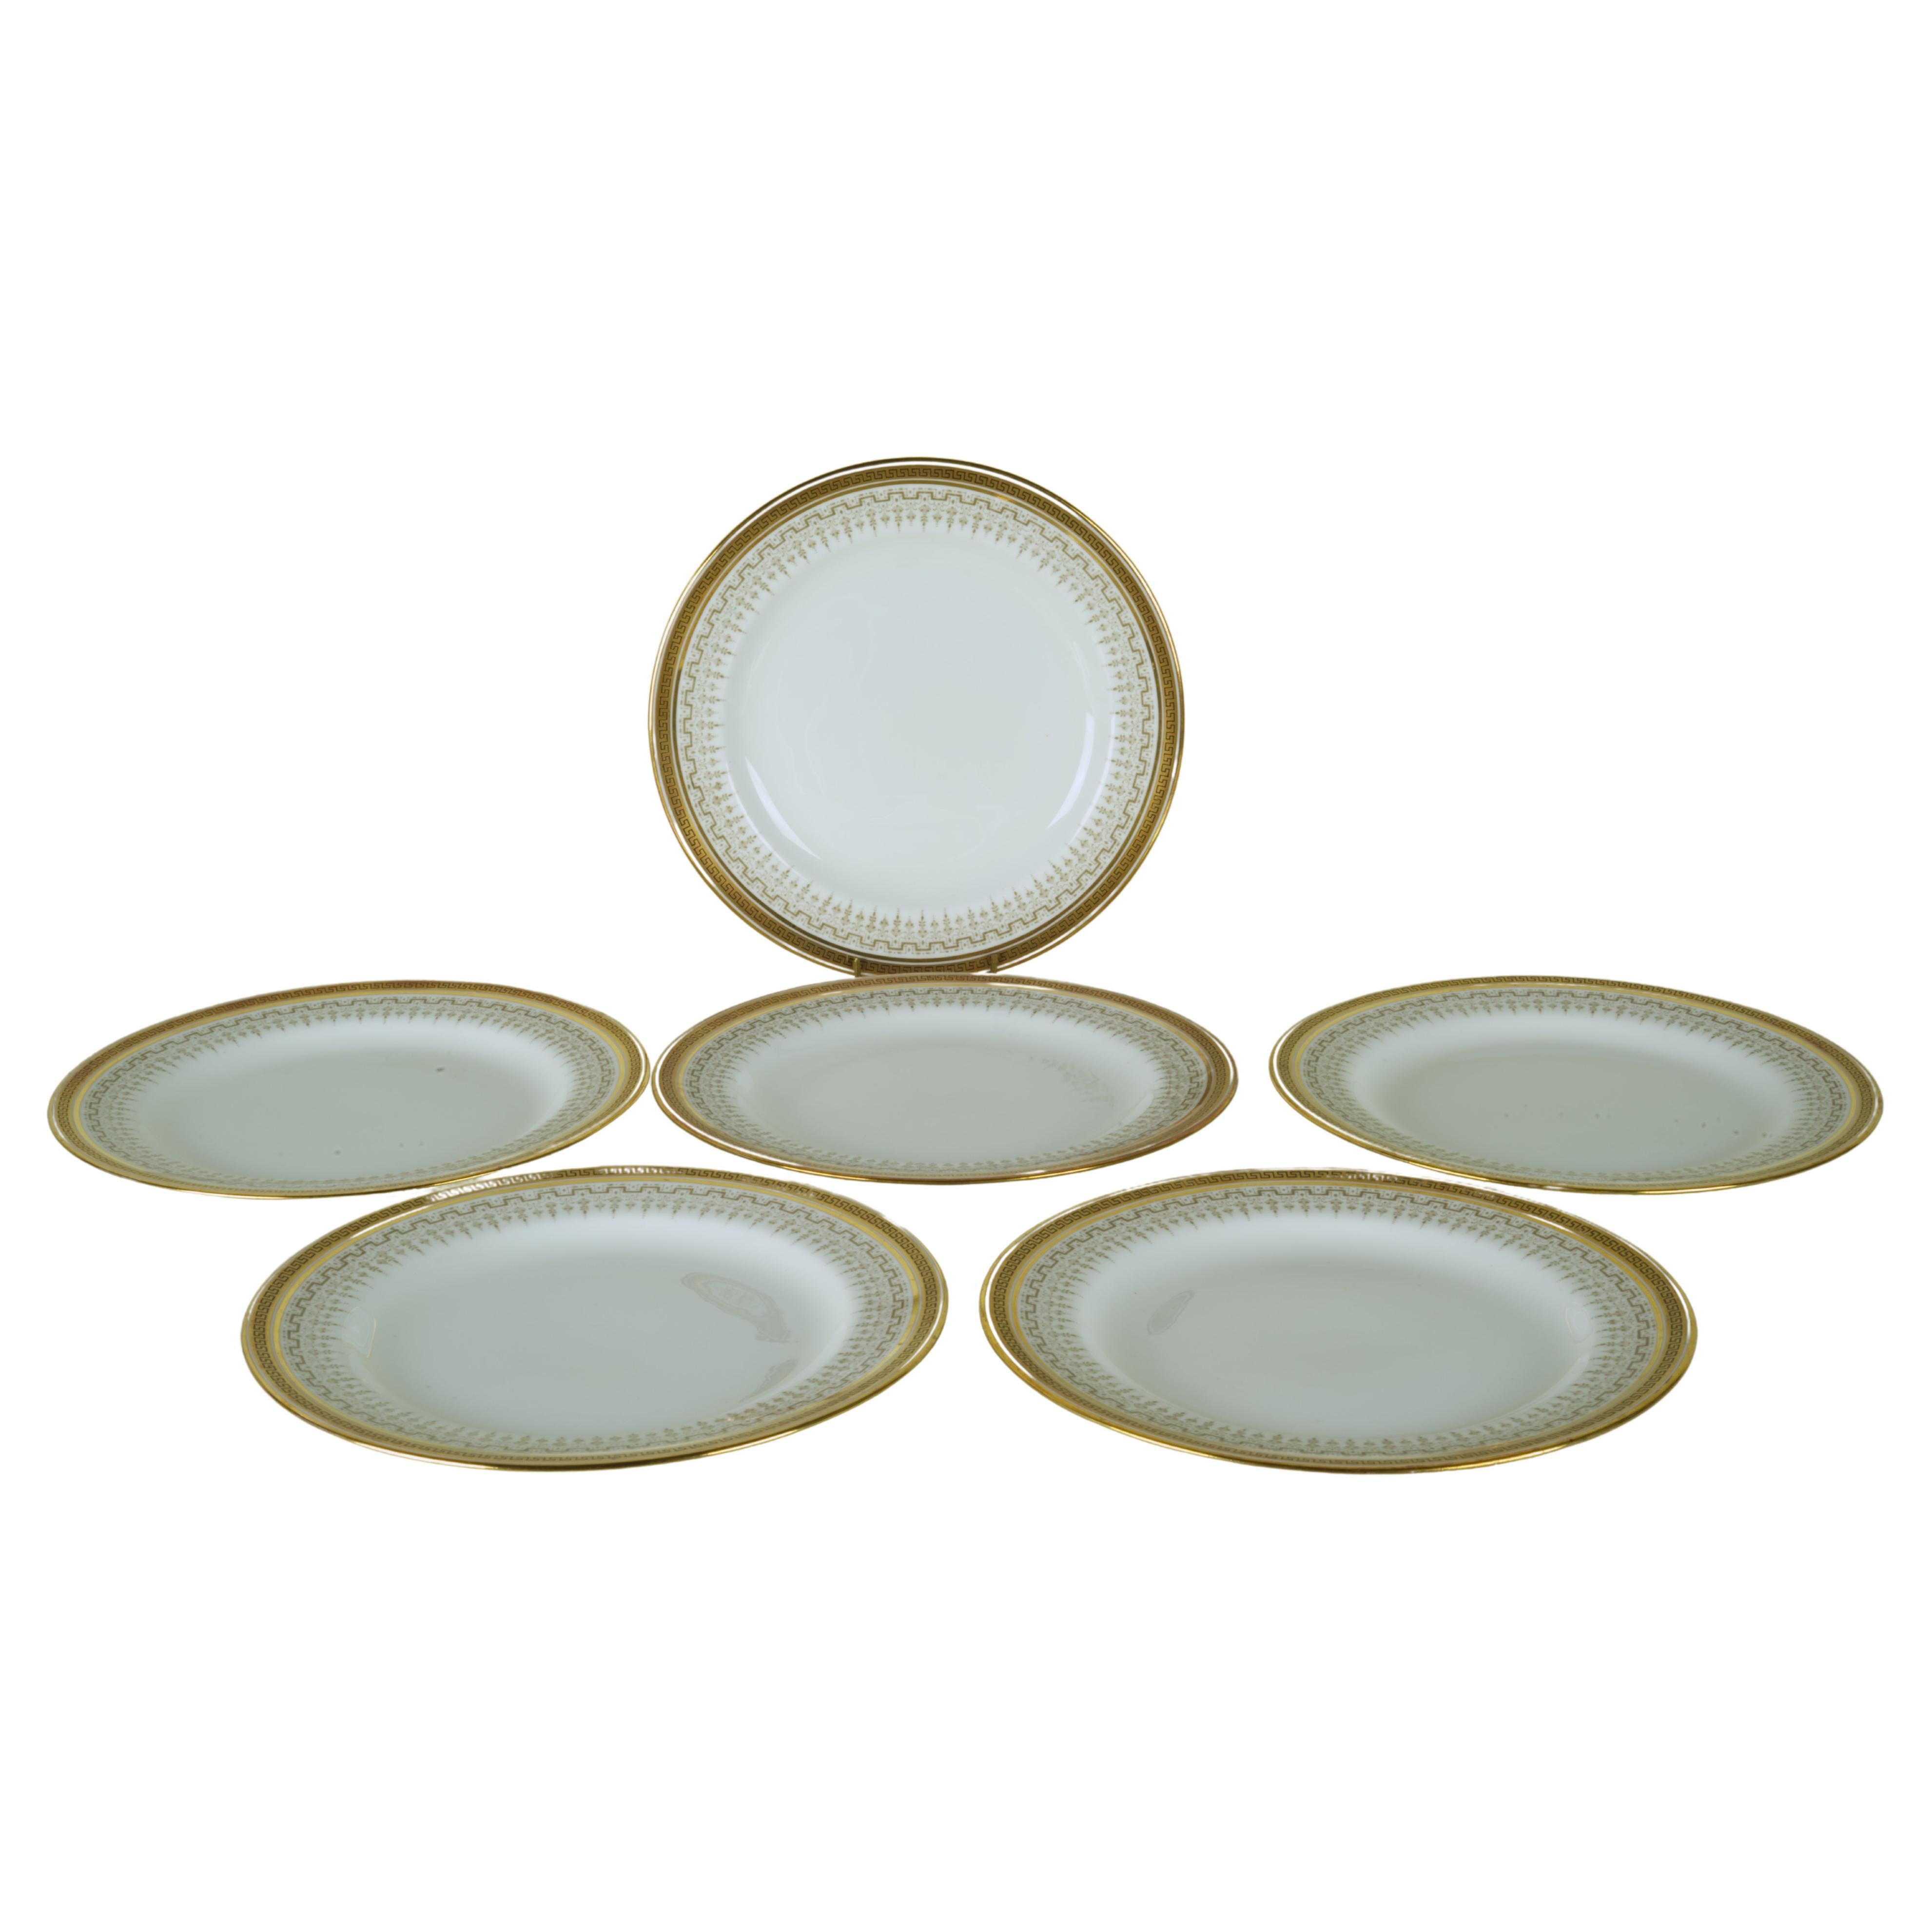 Other Cauldon set of 6 luncheon plates in H8413 pattern, 1904-1915 For Sale